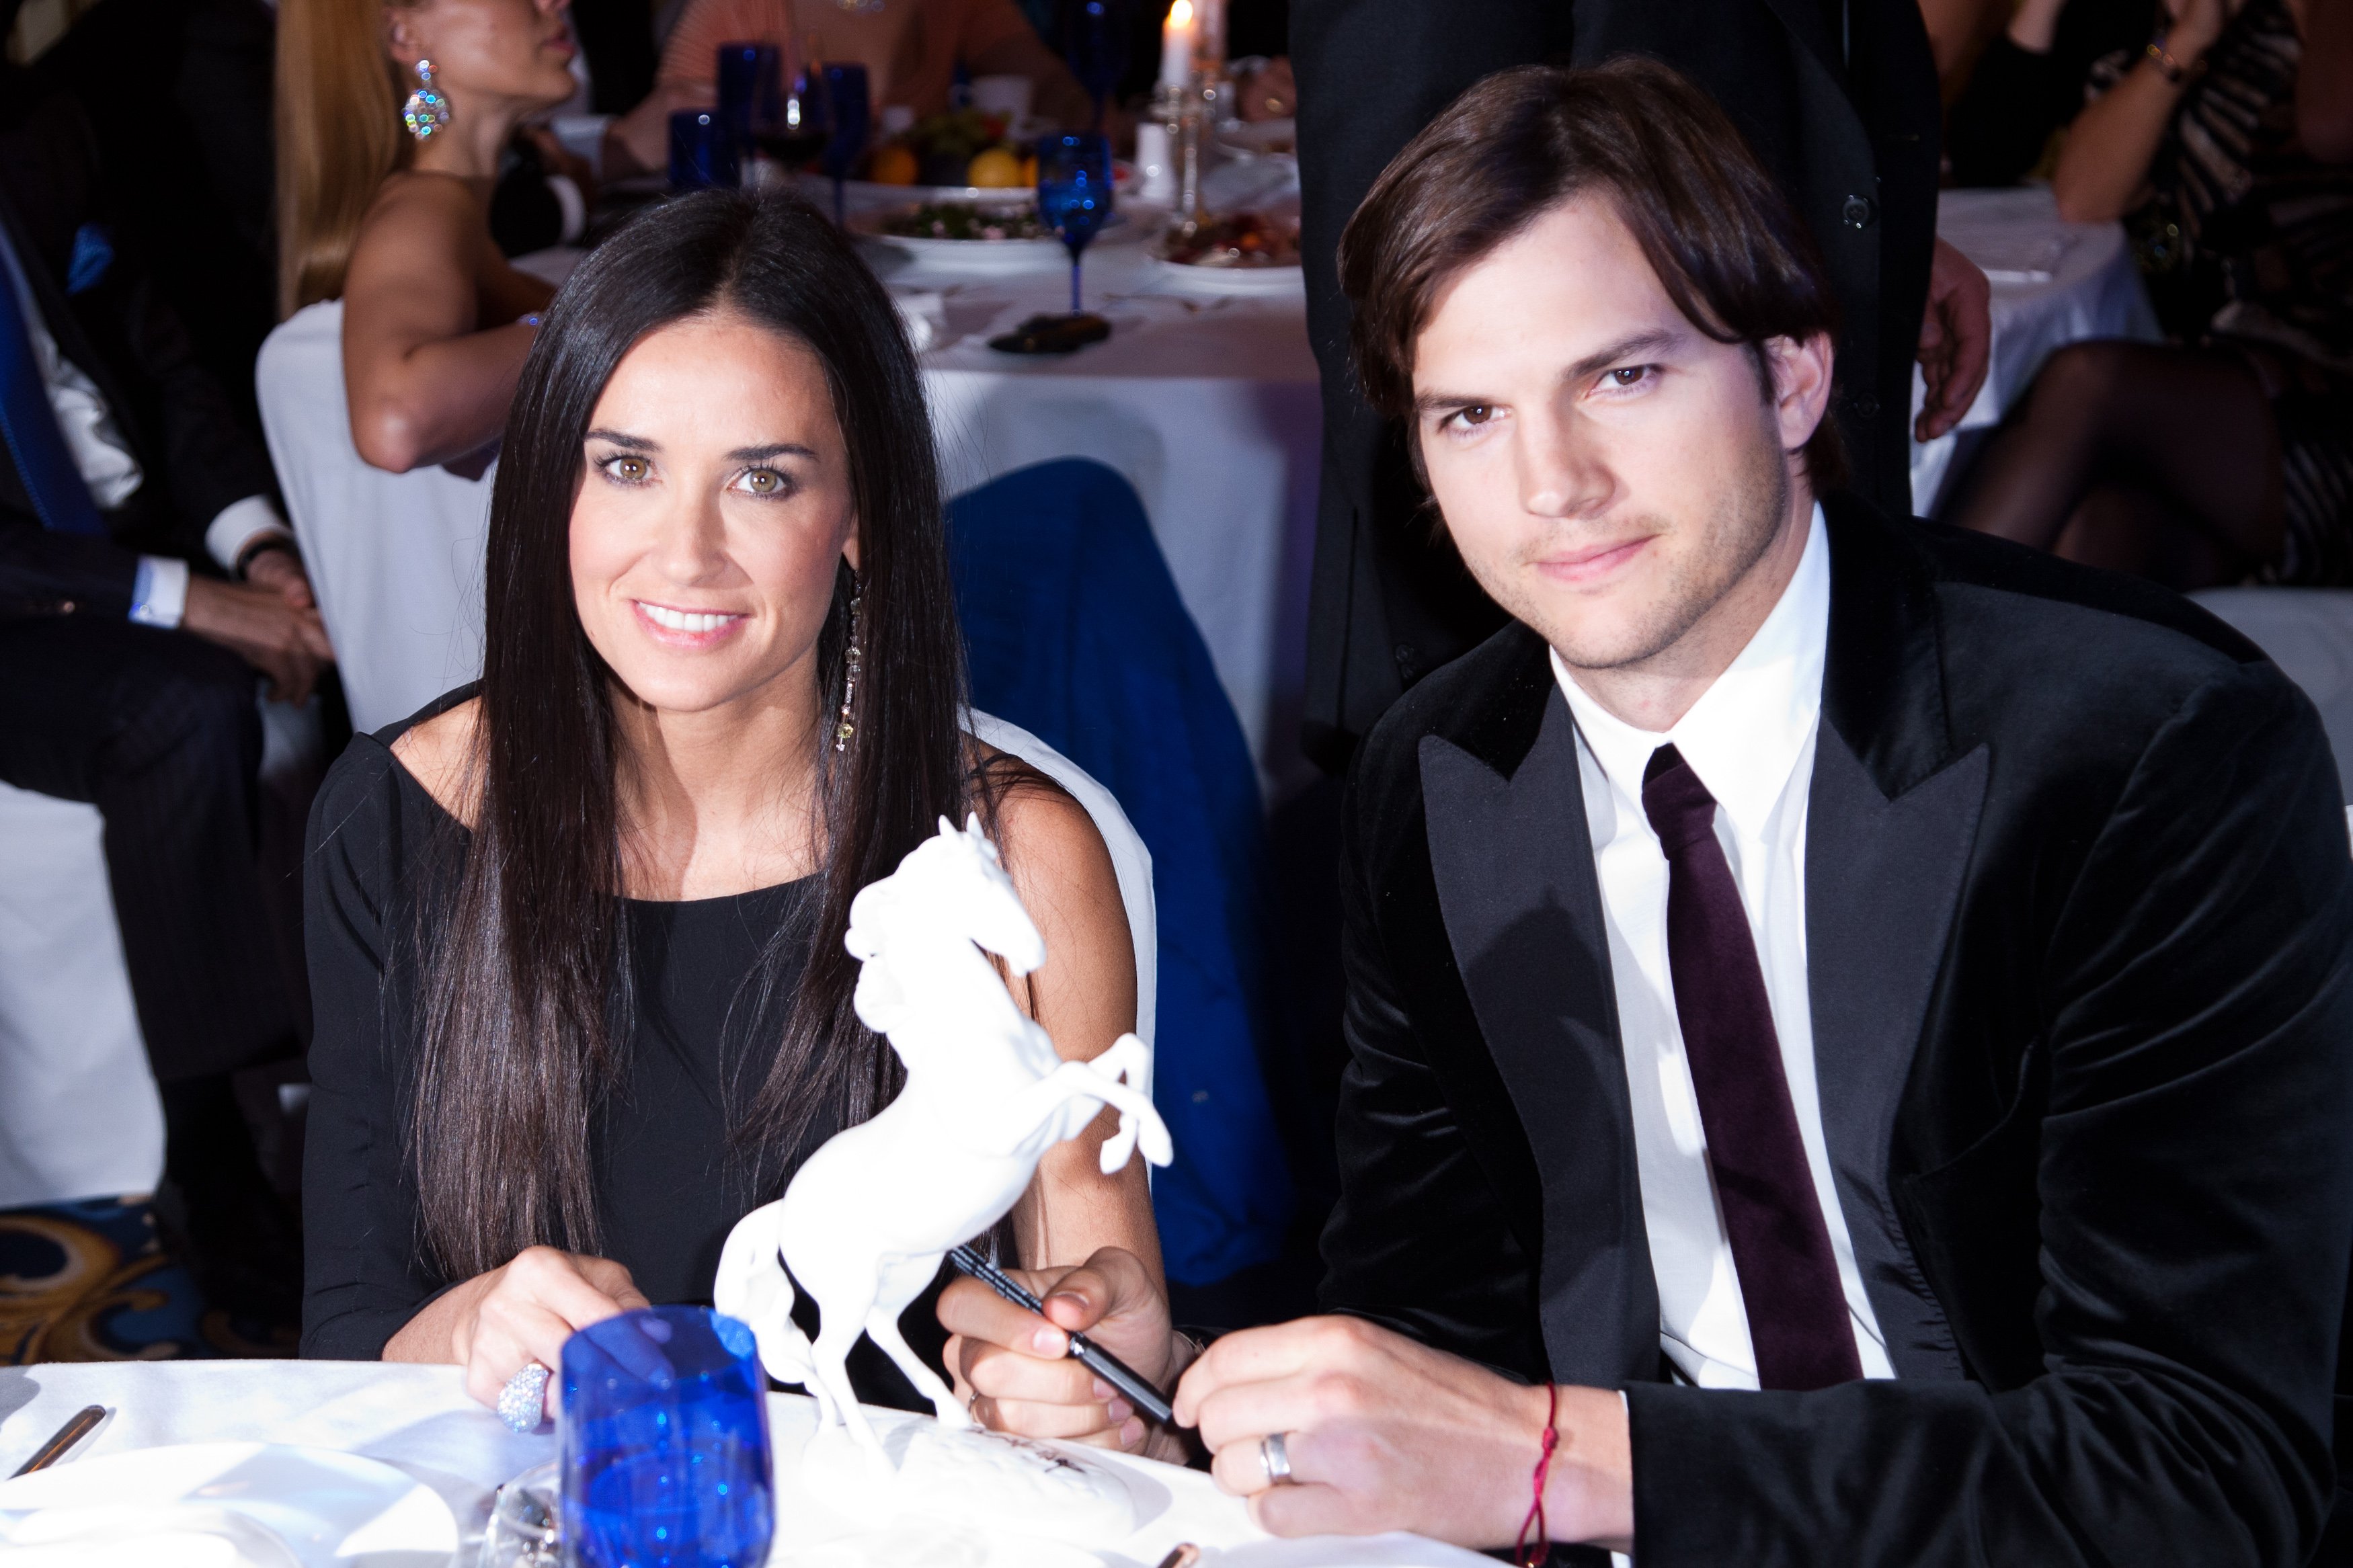 Demi Moore and Ashton Kutcher attend the Charity Gala on October 30, 2010 | Photo: GettyImages